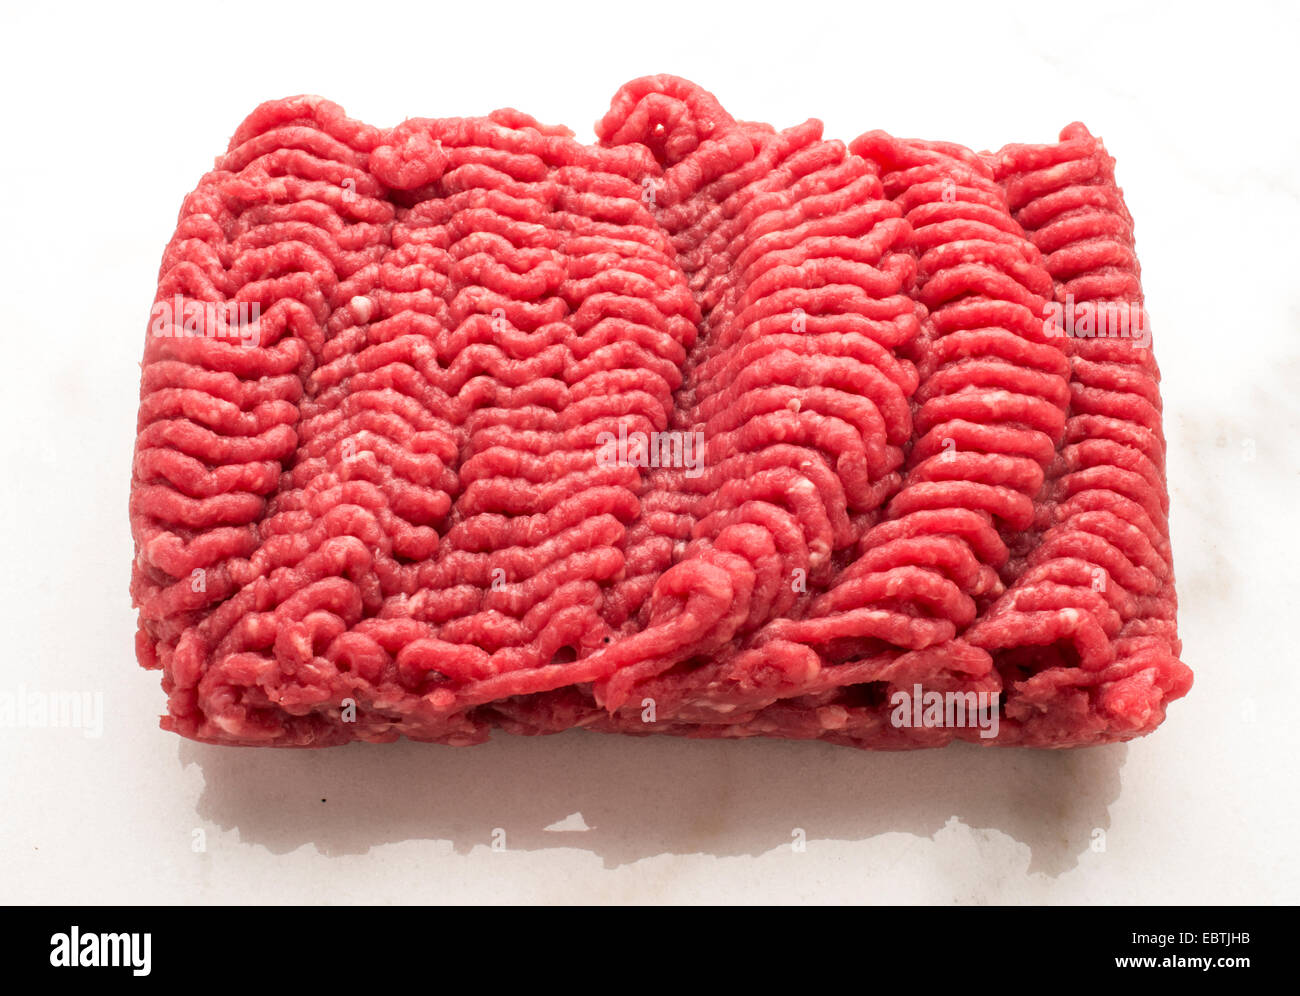 Burger red raw meat Banque D'Images